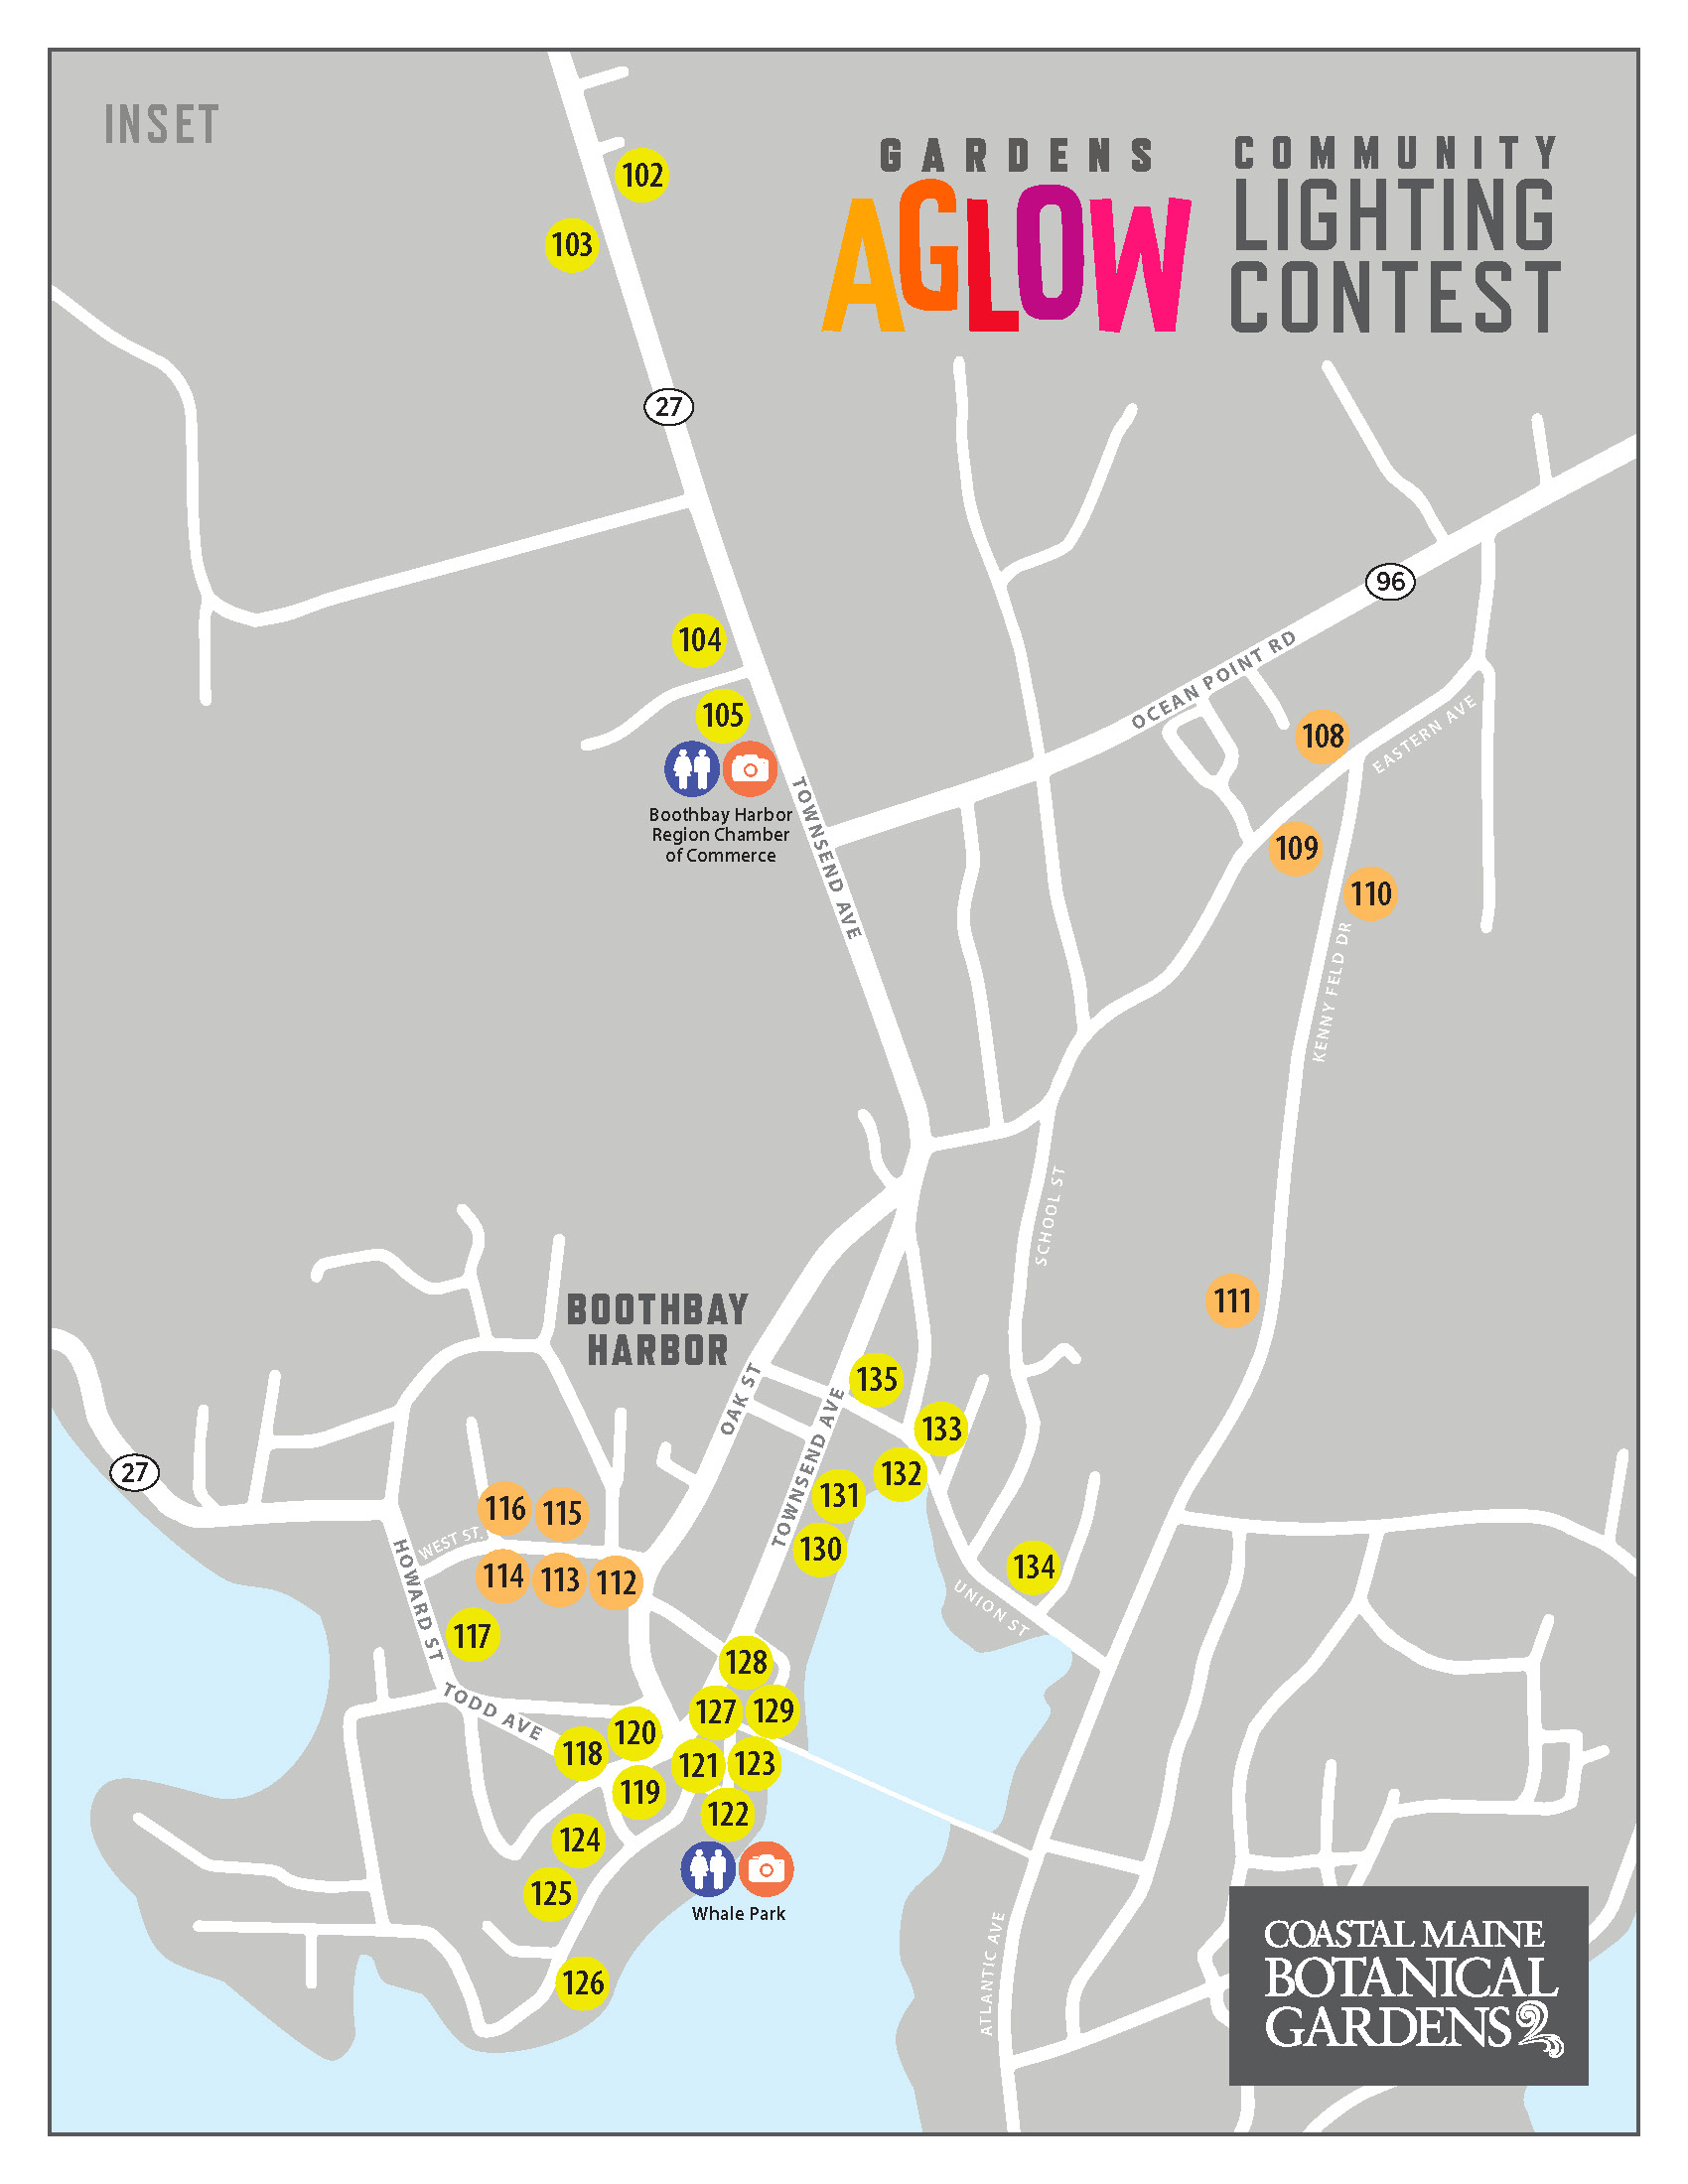 Community Lighting Contest Map of downtown Boothbay Harbor.